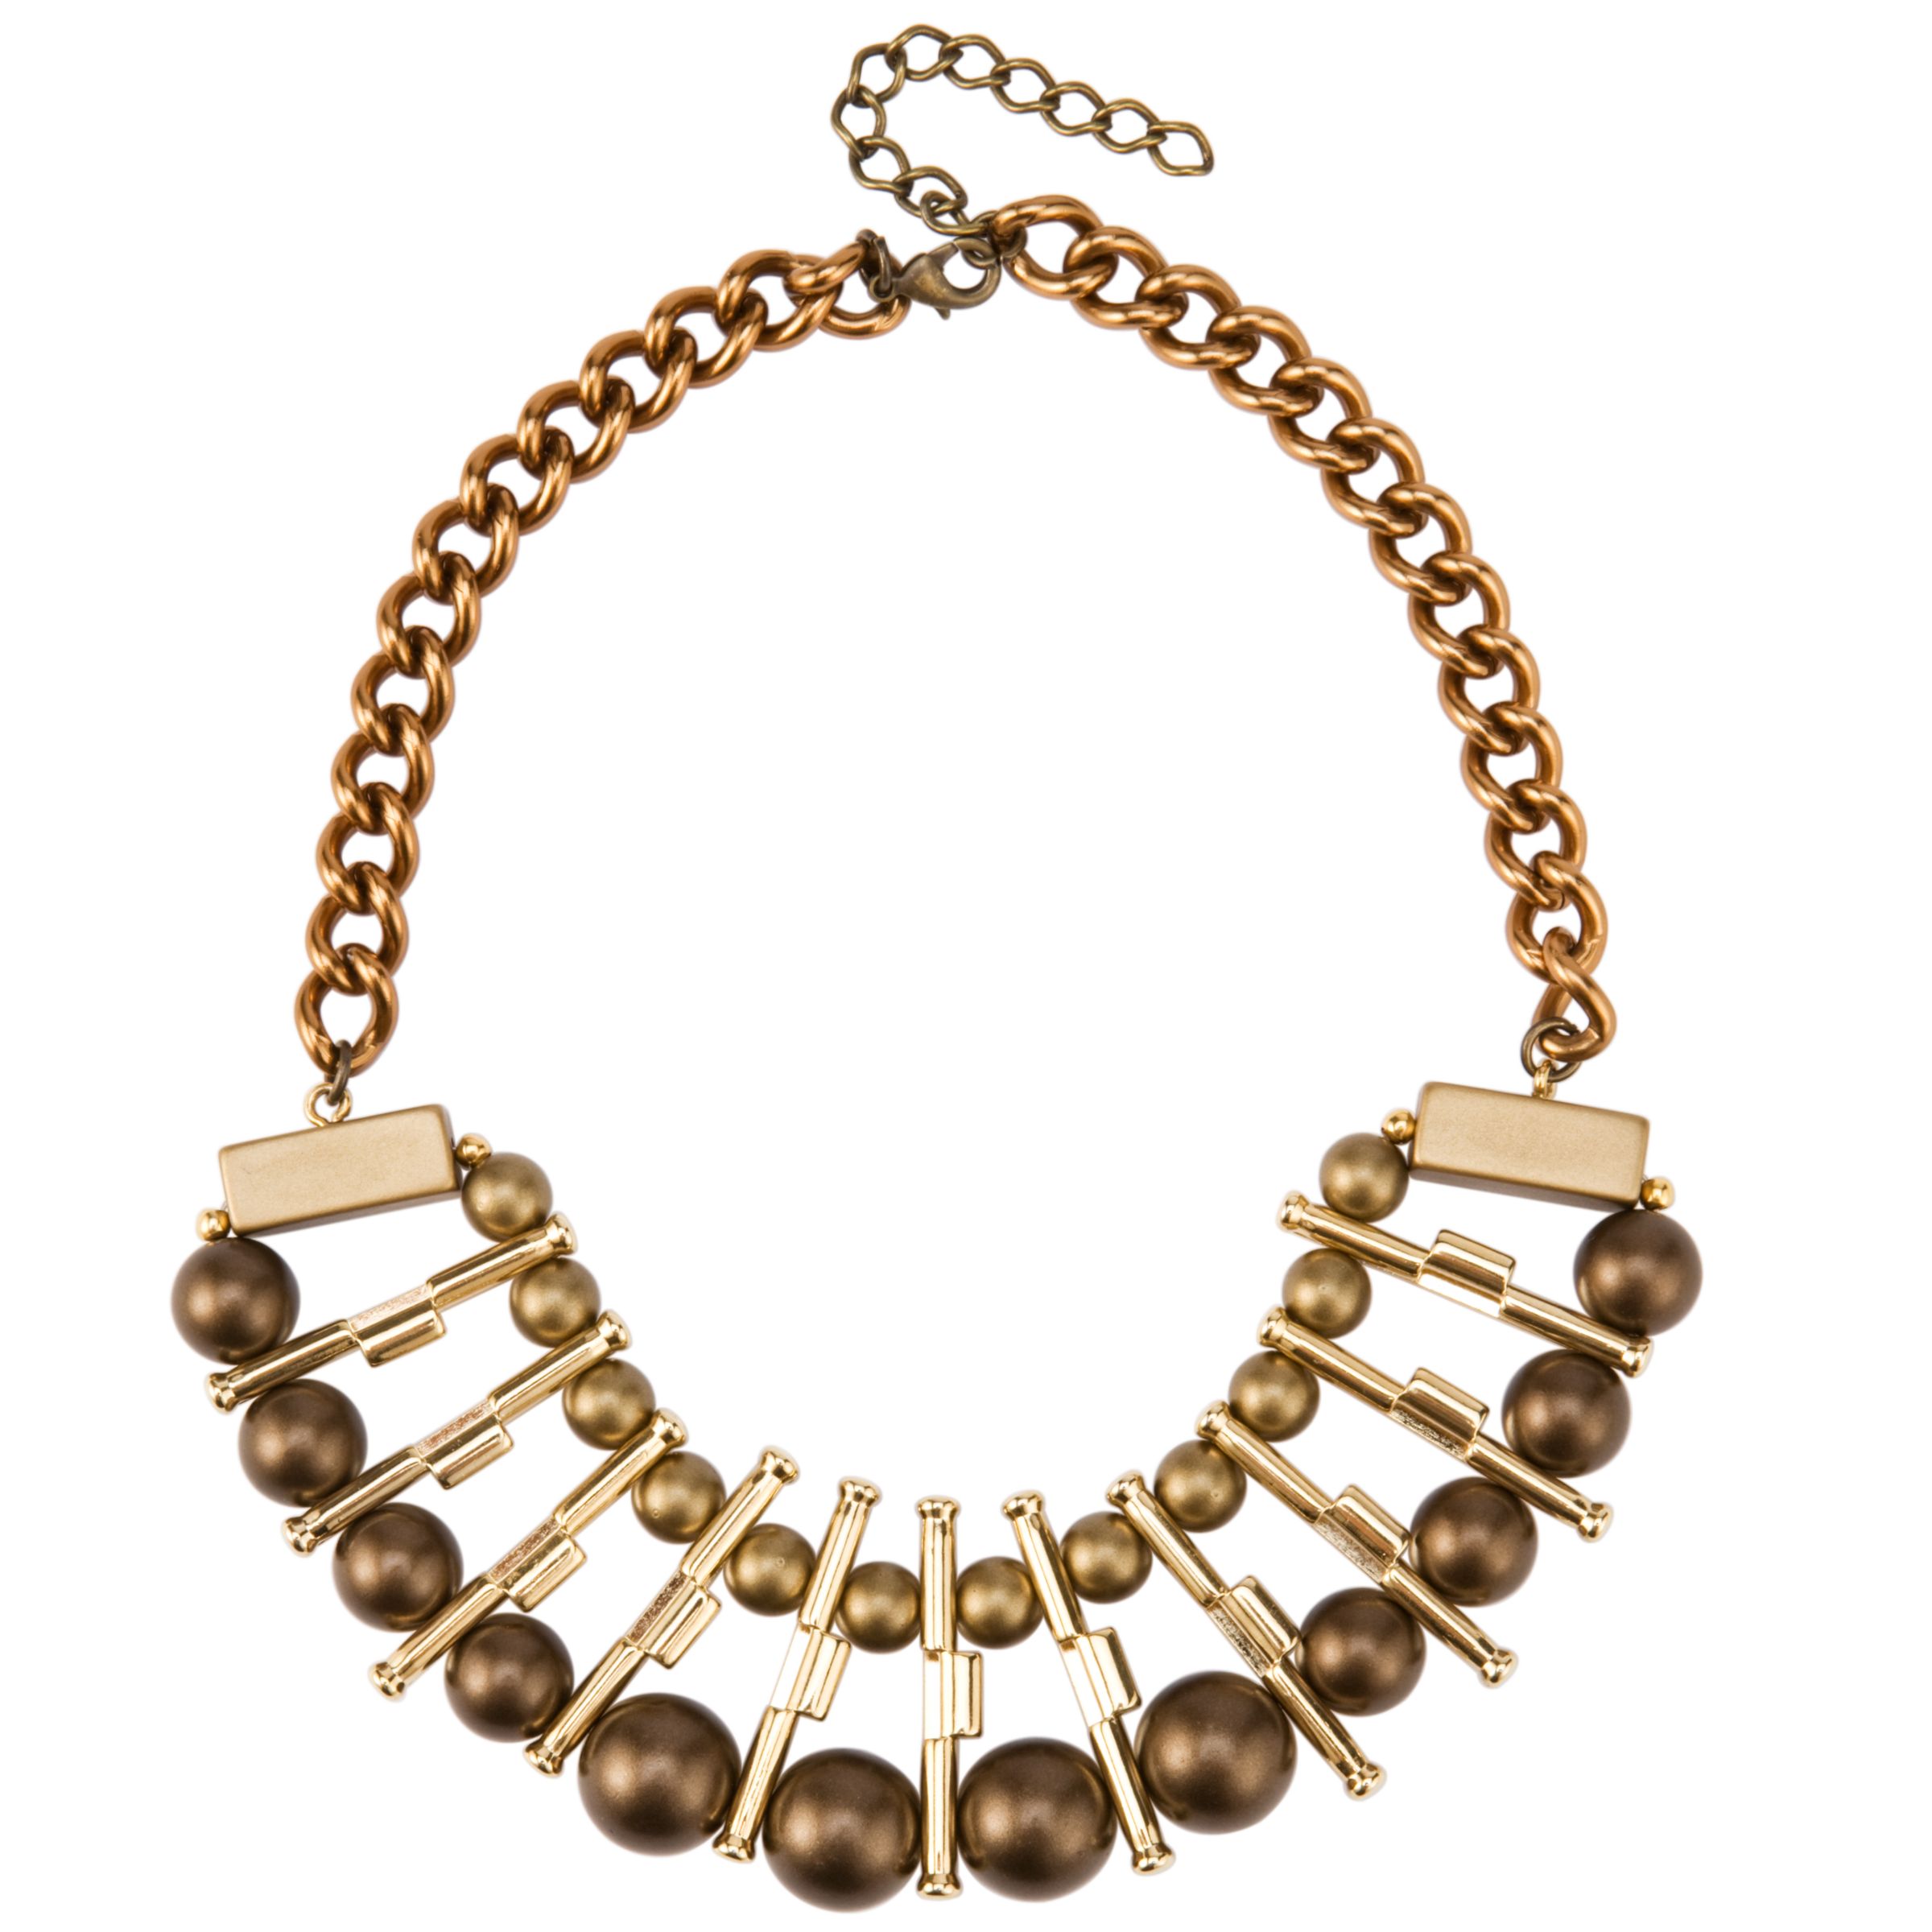 Statement Necklaces | Stunning Statement Necklaces | Page 1 | Necklaces ...